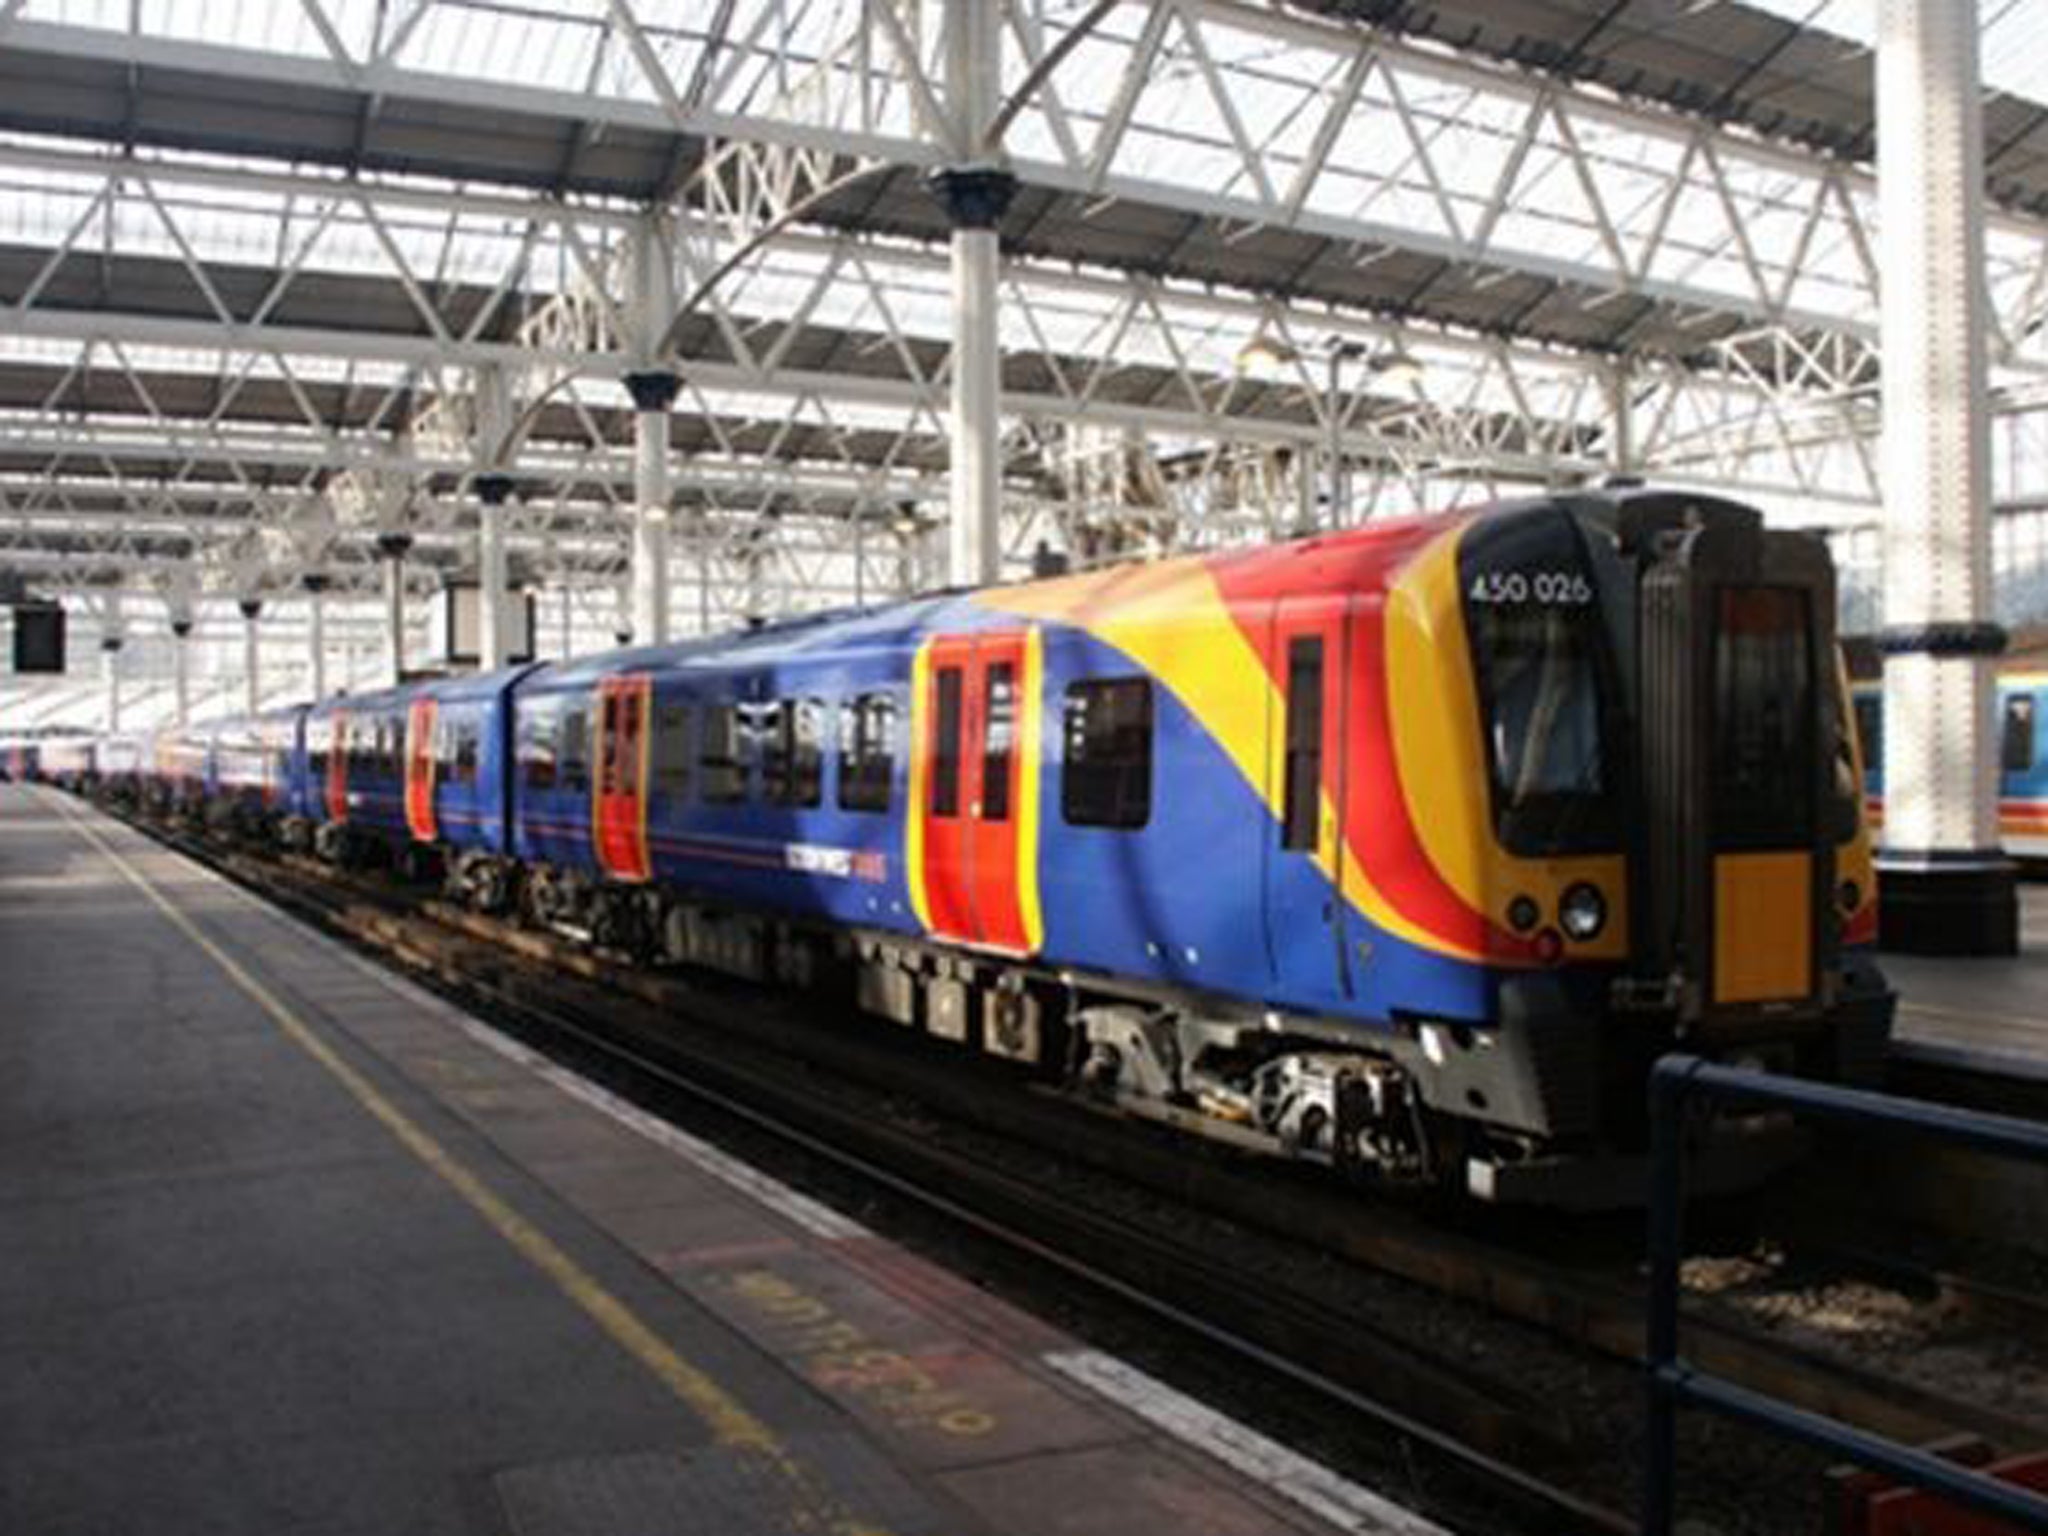 Network Rail runs and maintains 20,000 miles of track and 18 major stations from Glasgow Central down to Bristol Temple Meads